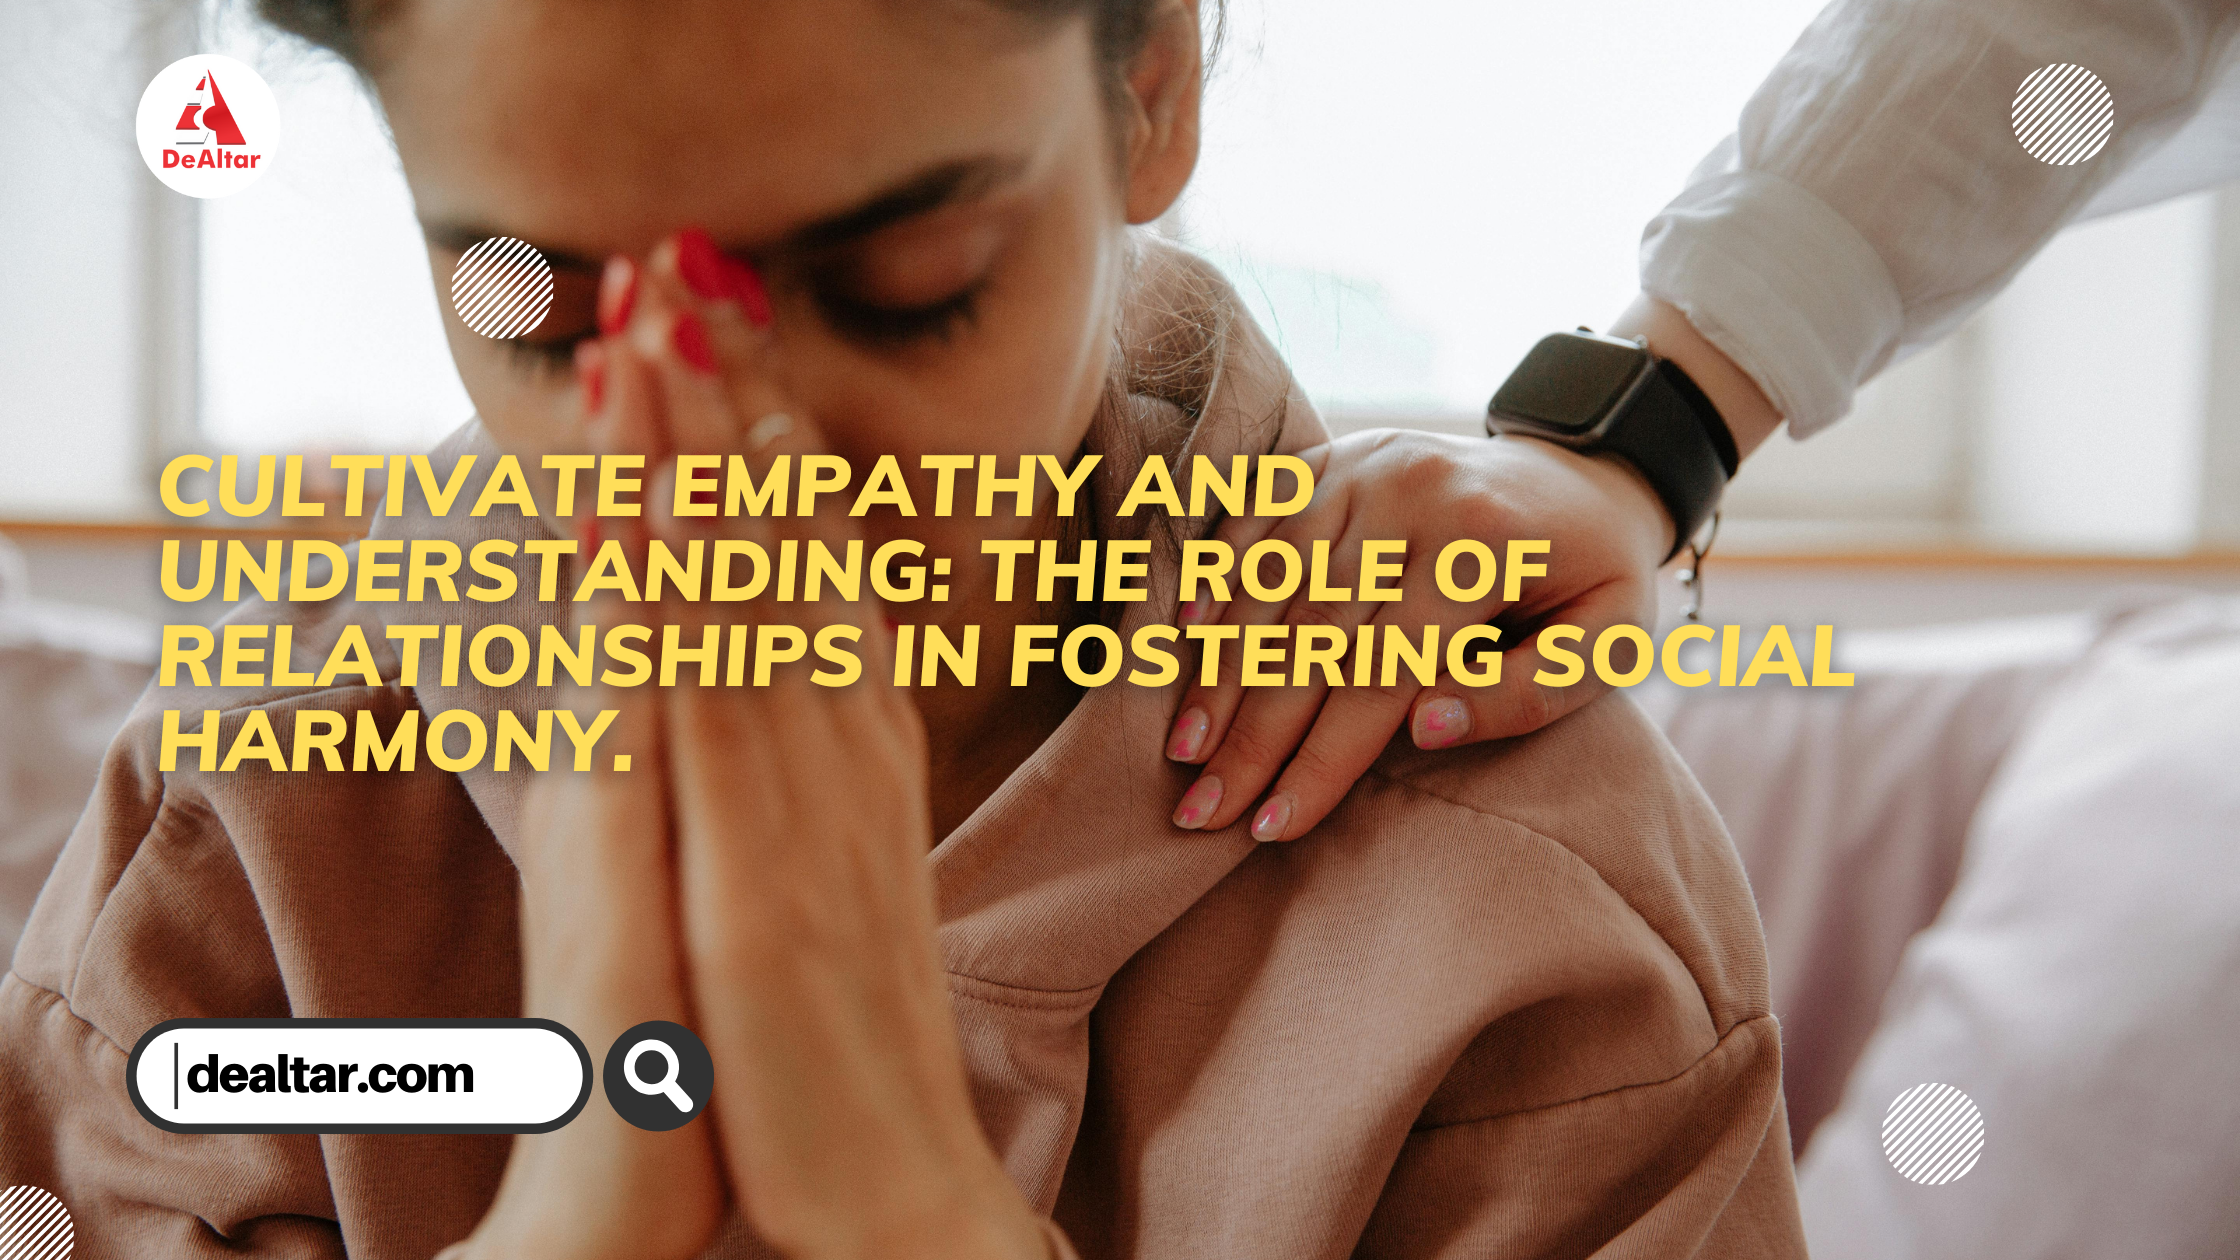 Cultivate empathy and understanding: The role of relationships in fostering social harmony.